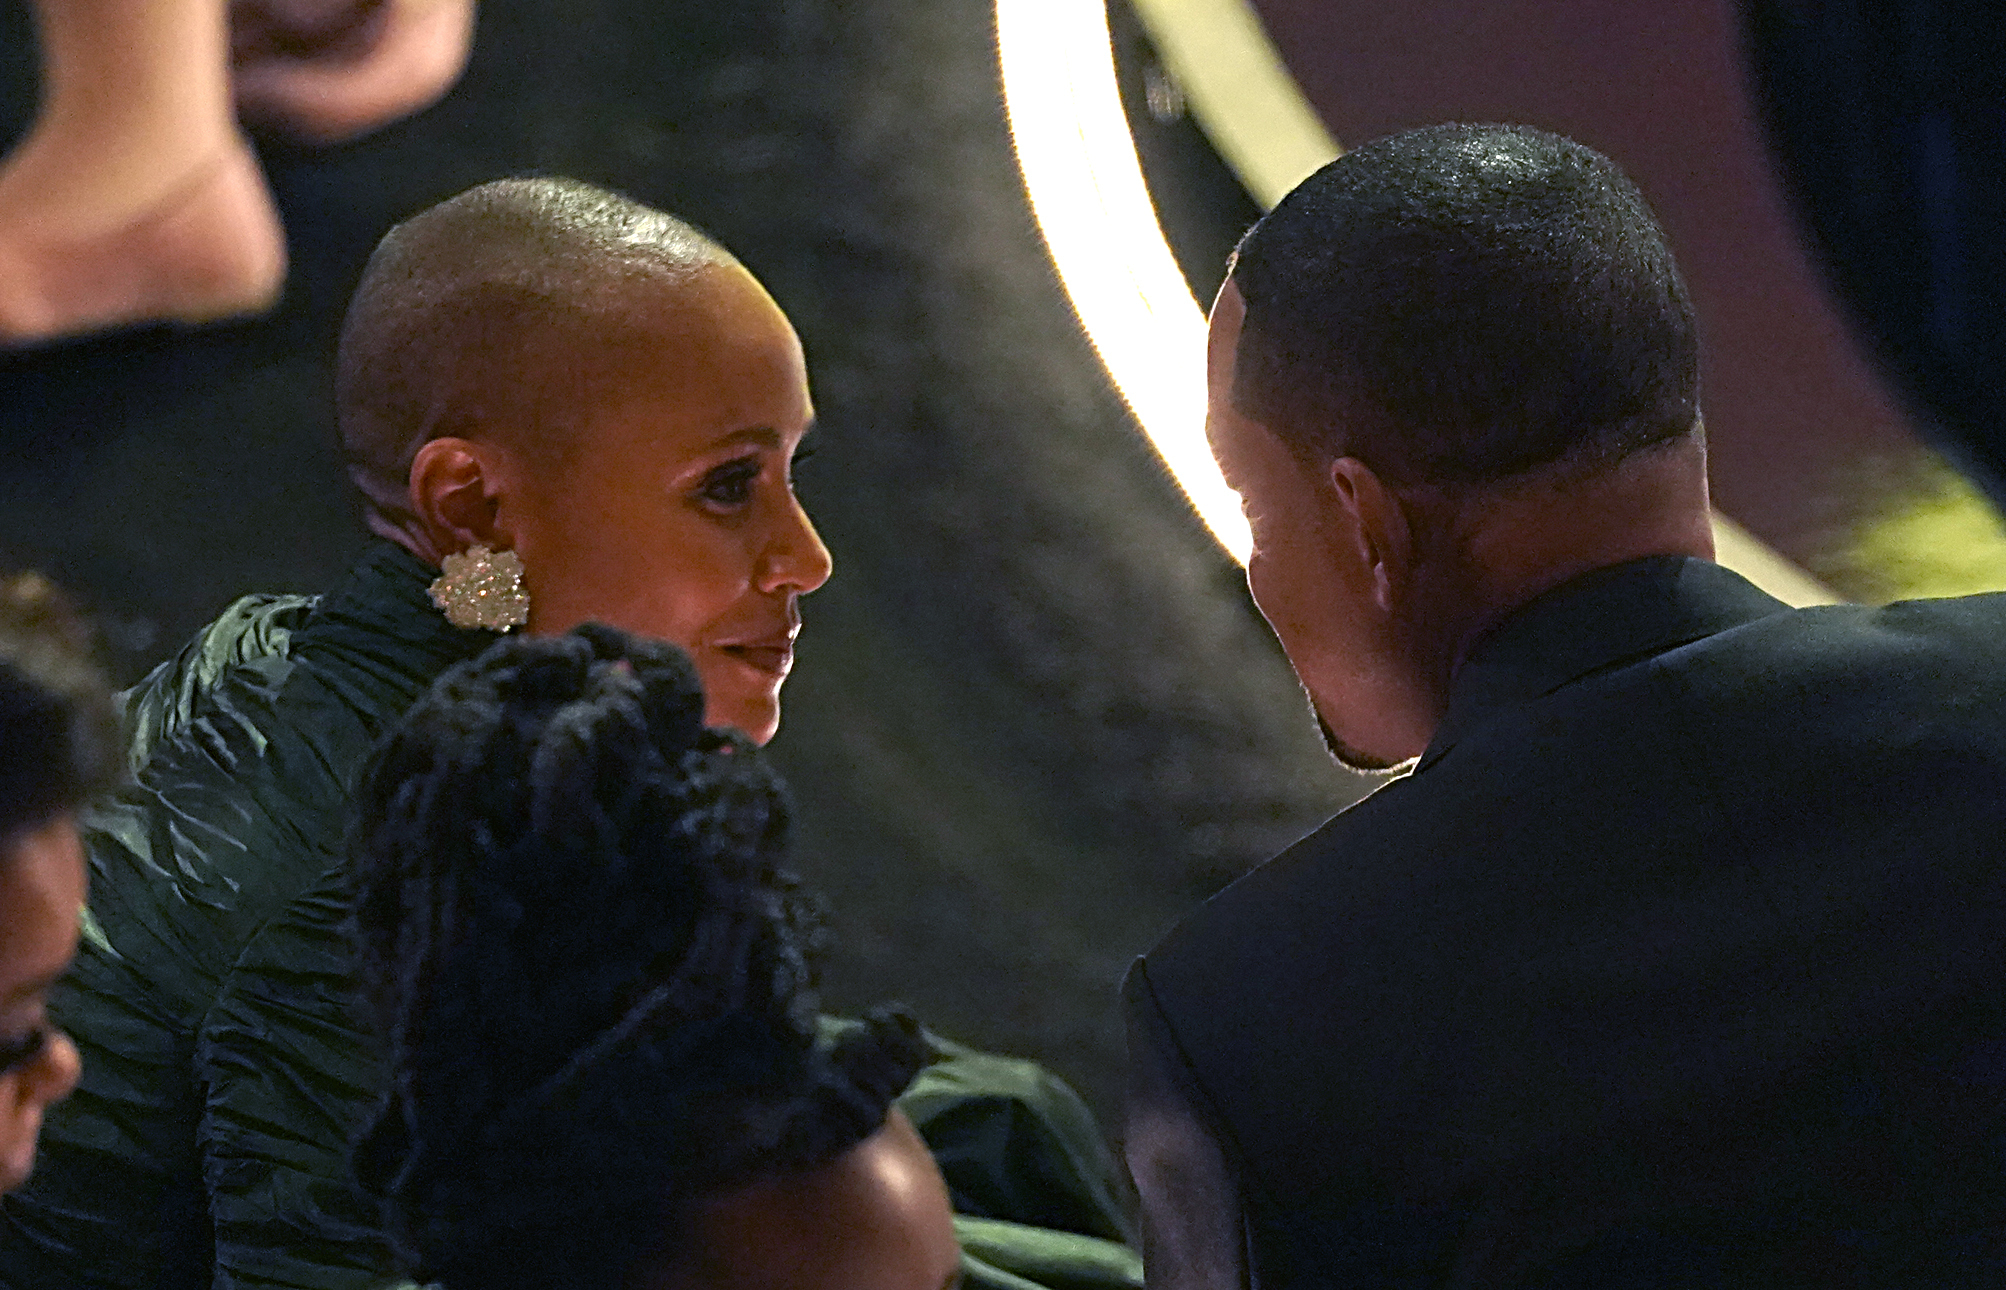 What is alopecia? Jada Pinkett Smith's hair loss from disease at center of  Oscars spat